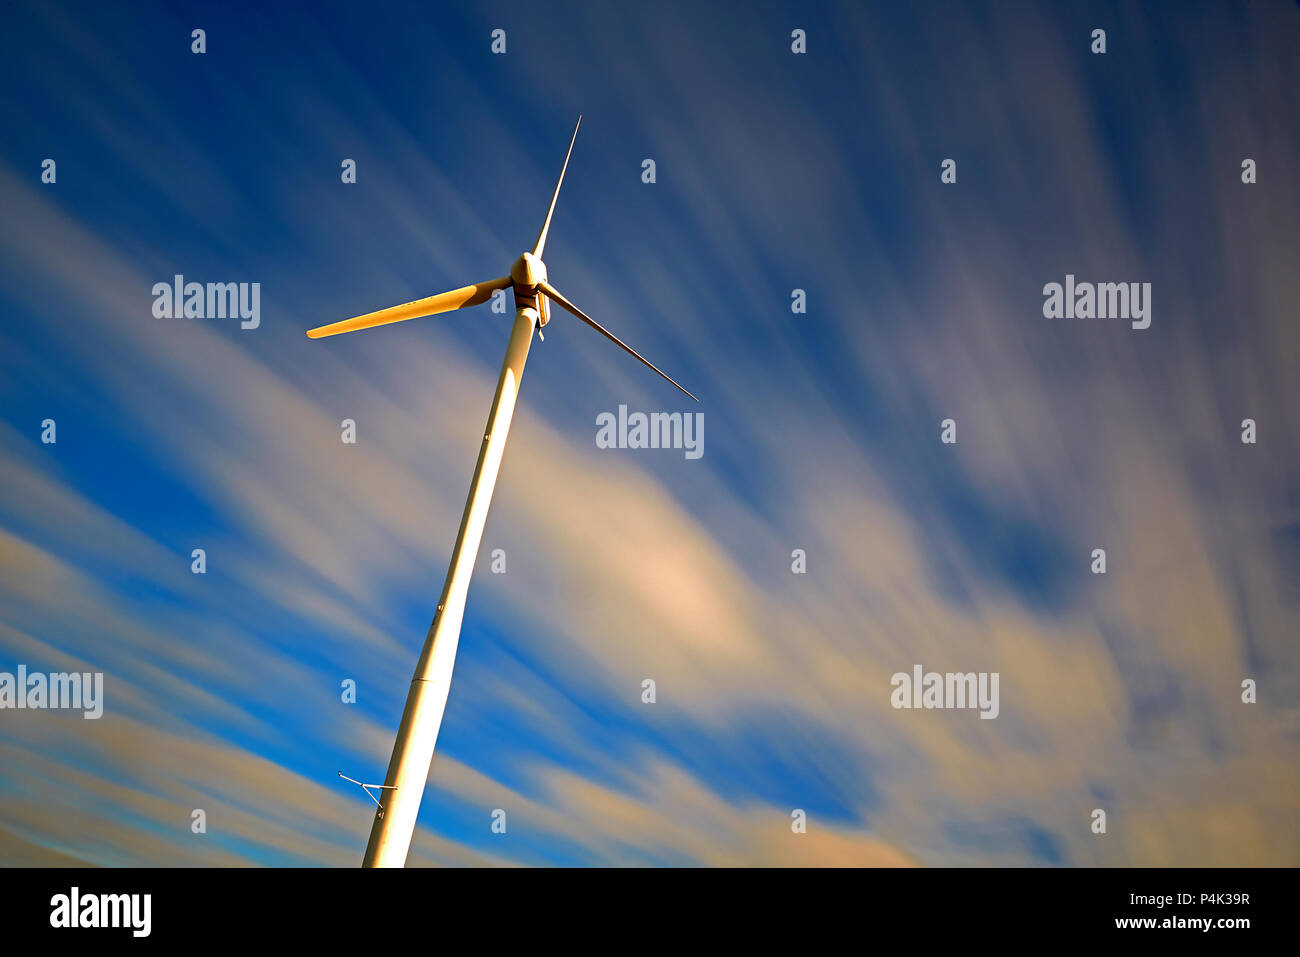 Long exposure of wind turbines with the movement of the clouds made visible to show the power of the wind to generate renewable clean energy Stock Photo